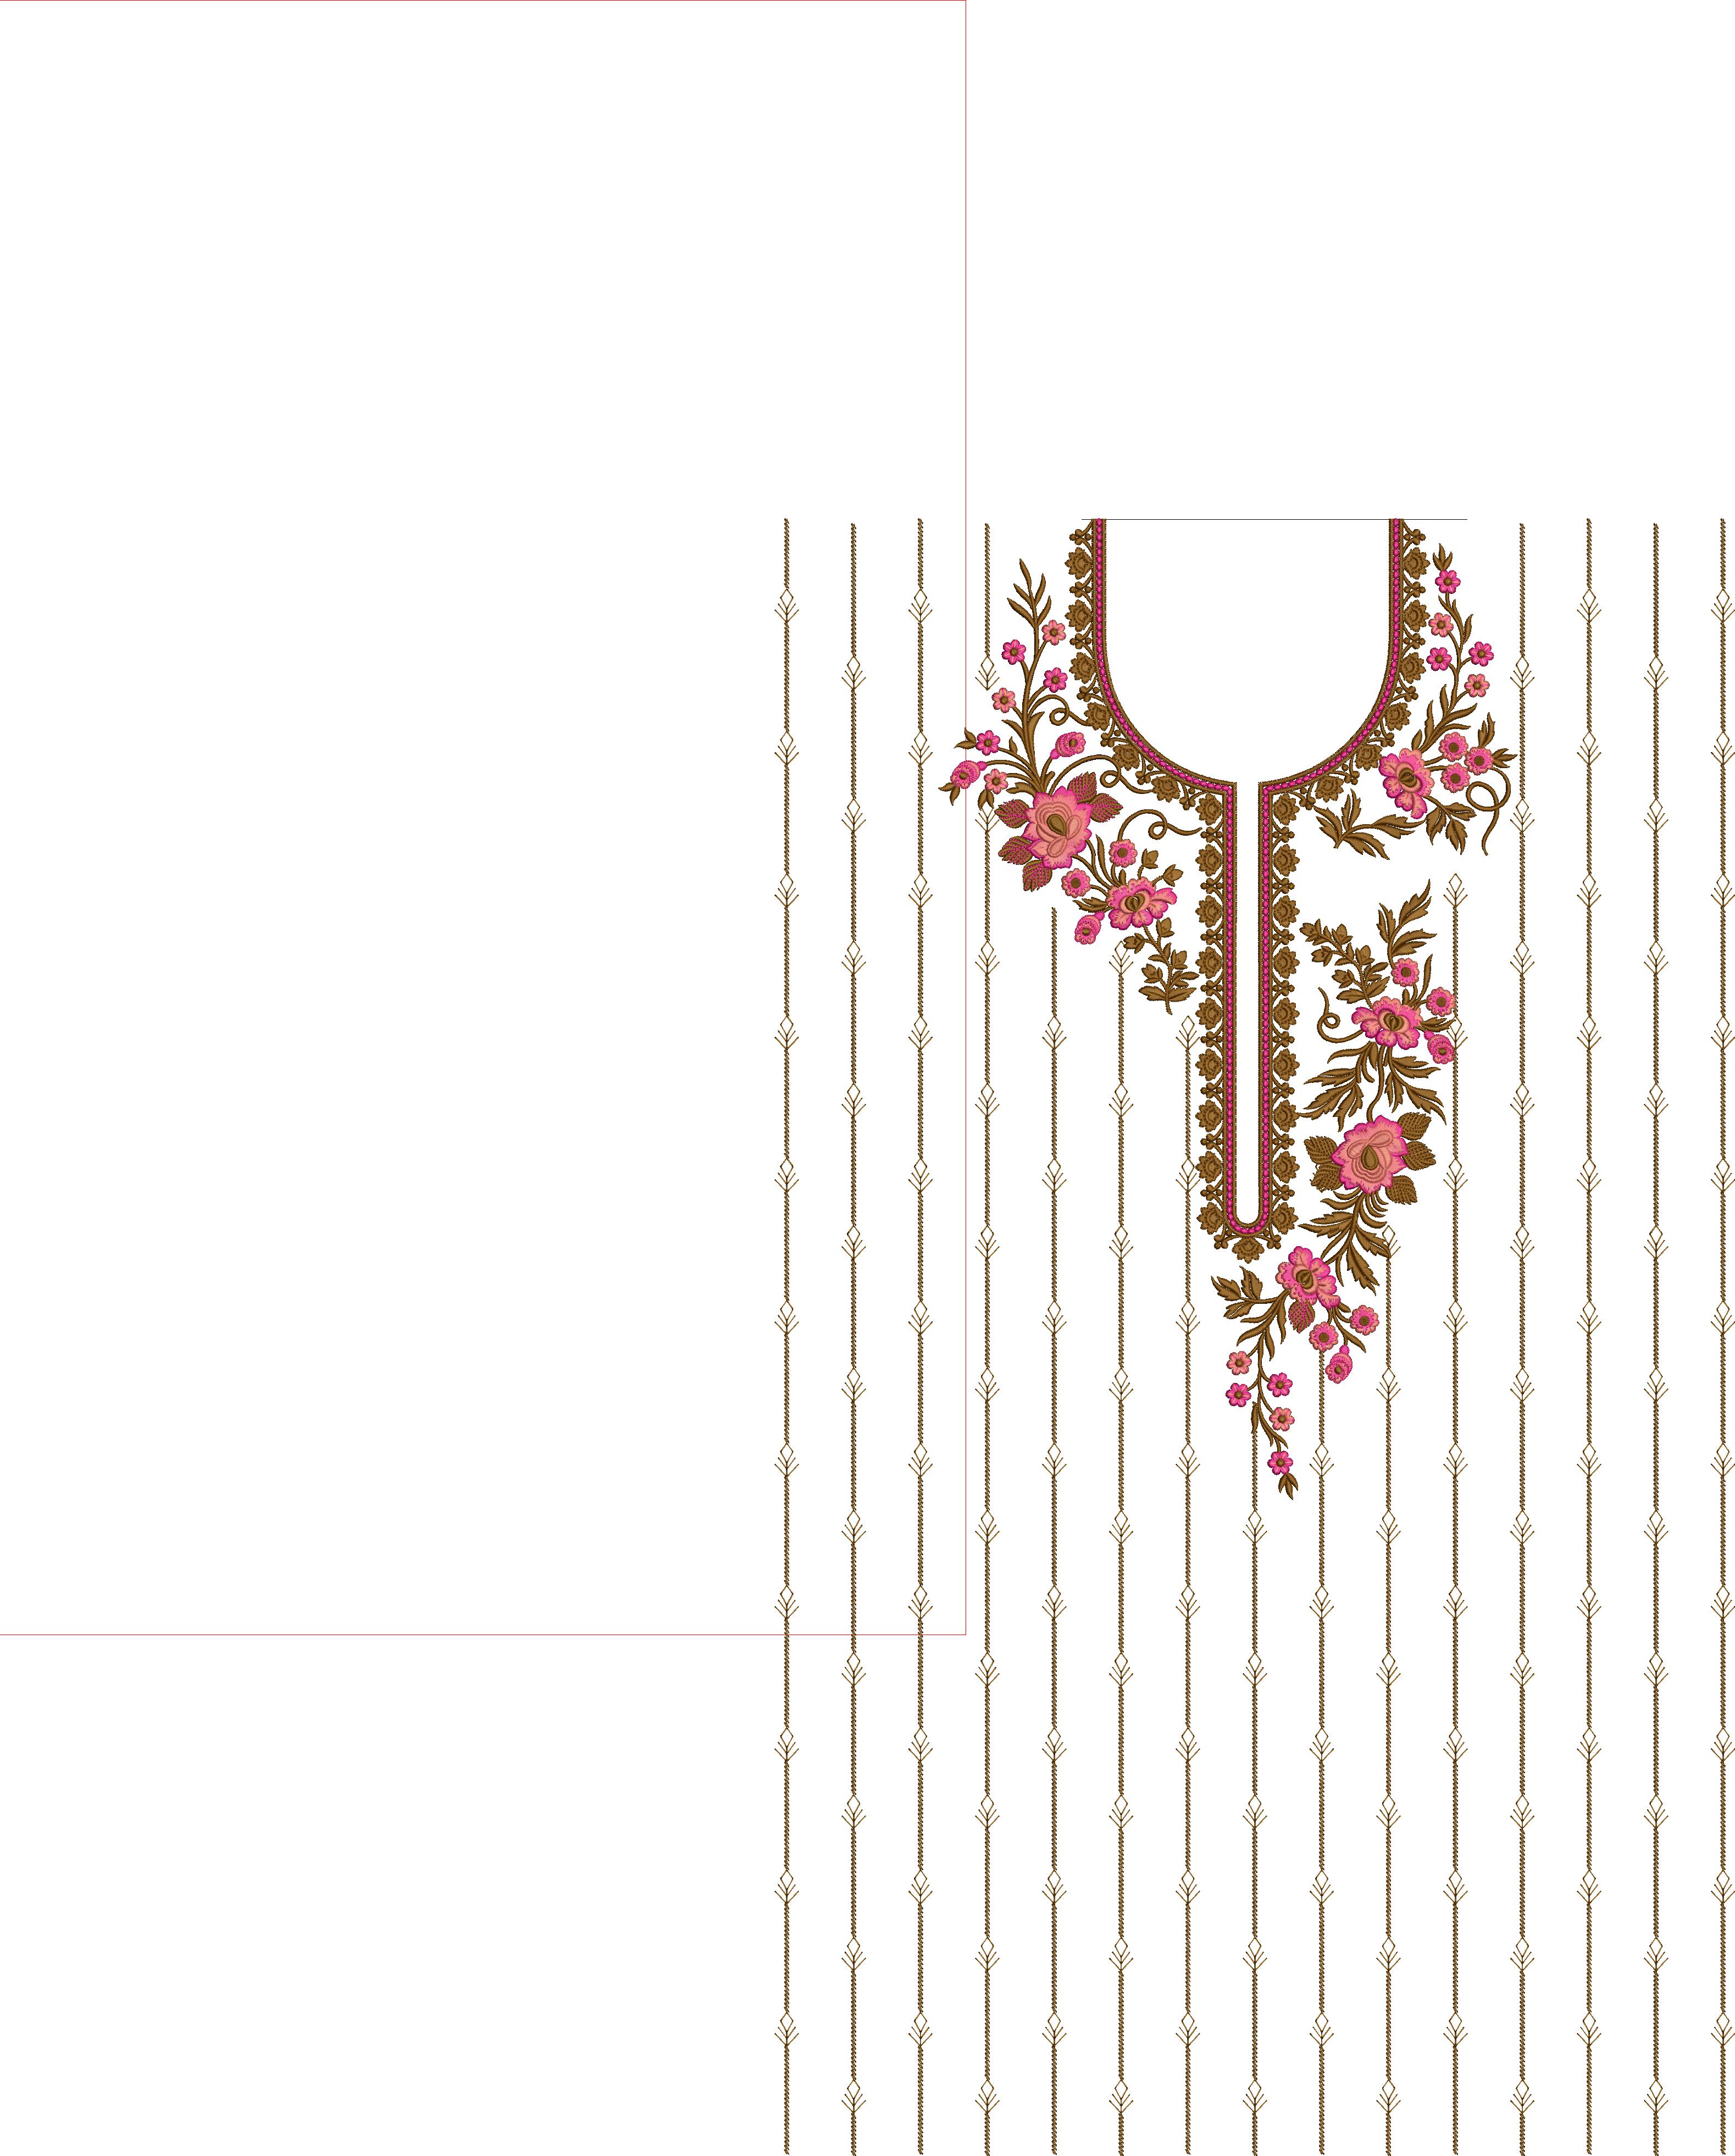 Special Free Suit and Indian Full Dress Embroidery Design (72)